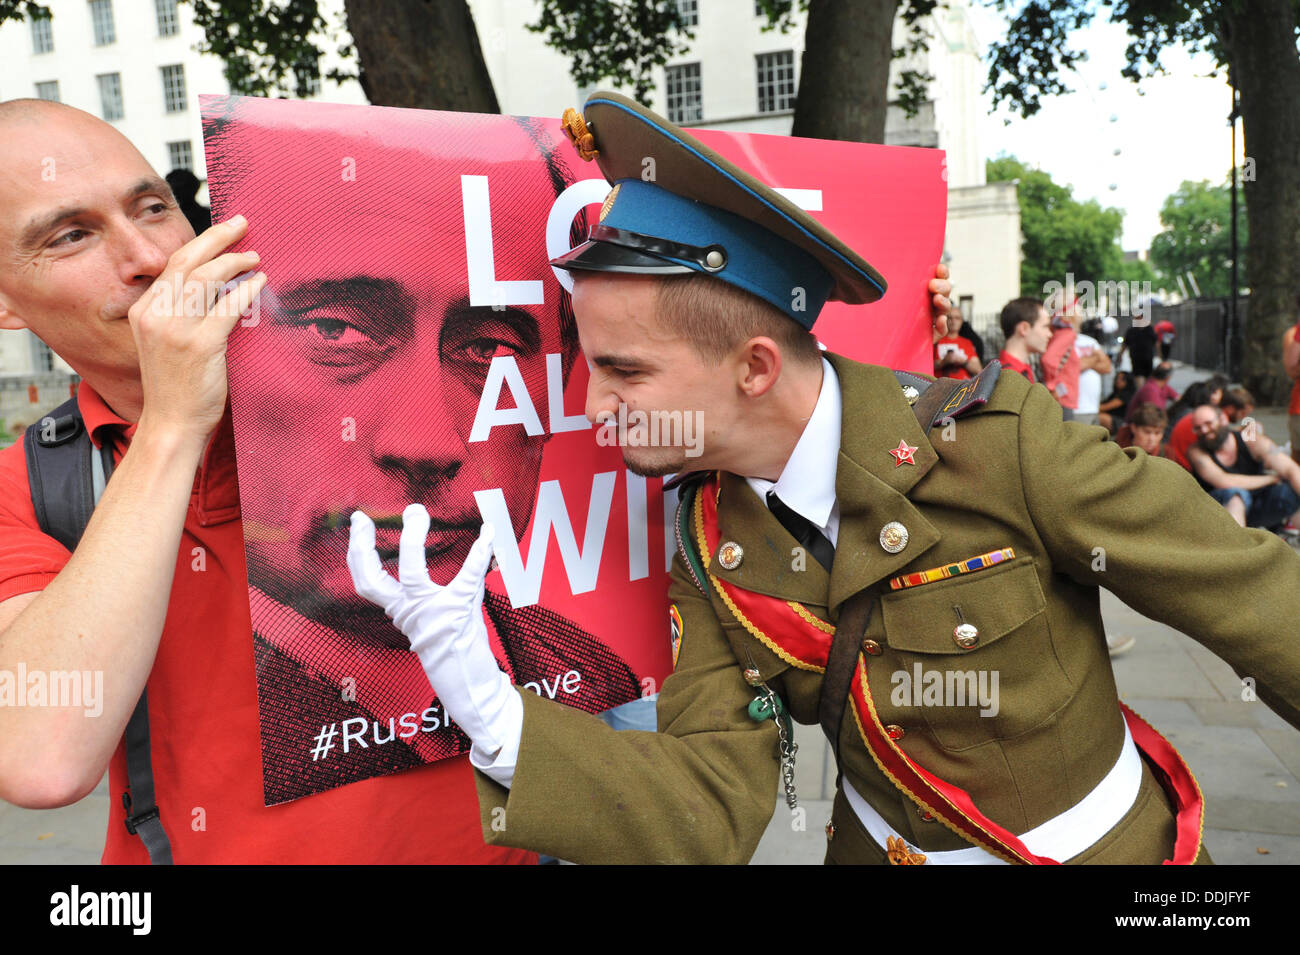 Whitehall, London, UK. 3rd September 2013. A protester has fun at Putins expence at, A Day of Action, 'Love Russia, Hate Homophobia' protest opposite Downing Street against the anti-gay laws in Russia. Credit:  Matthew Chattle/Alamy Live News Stock Photo